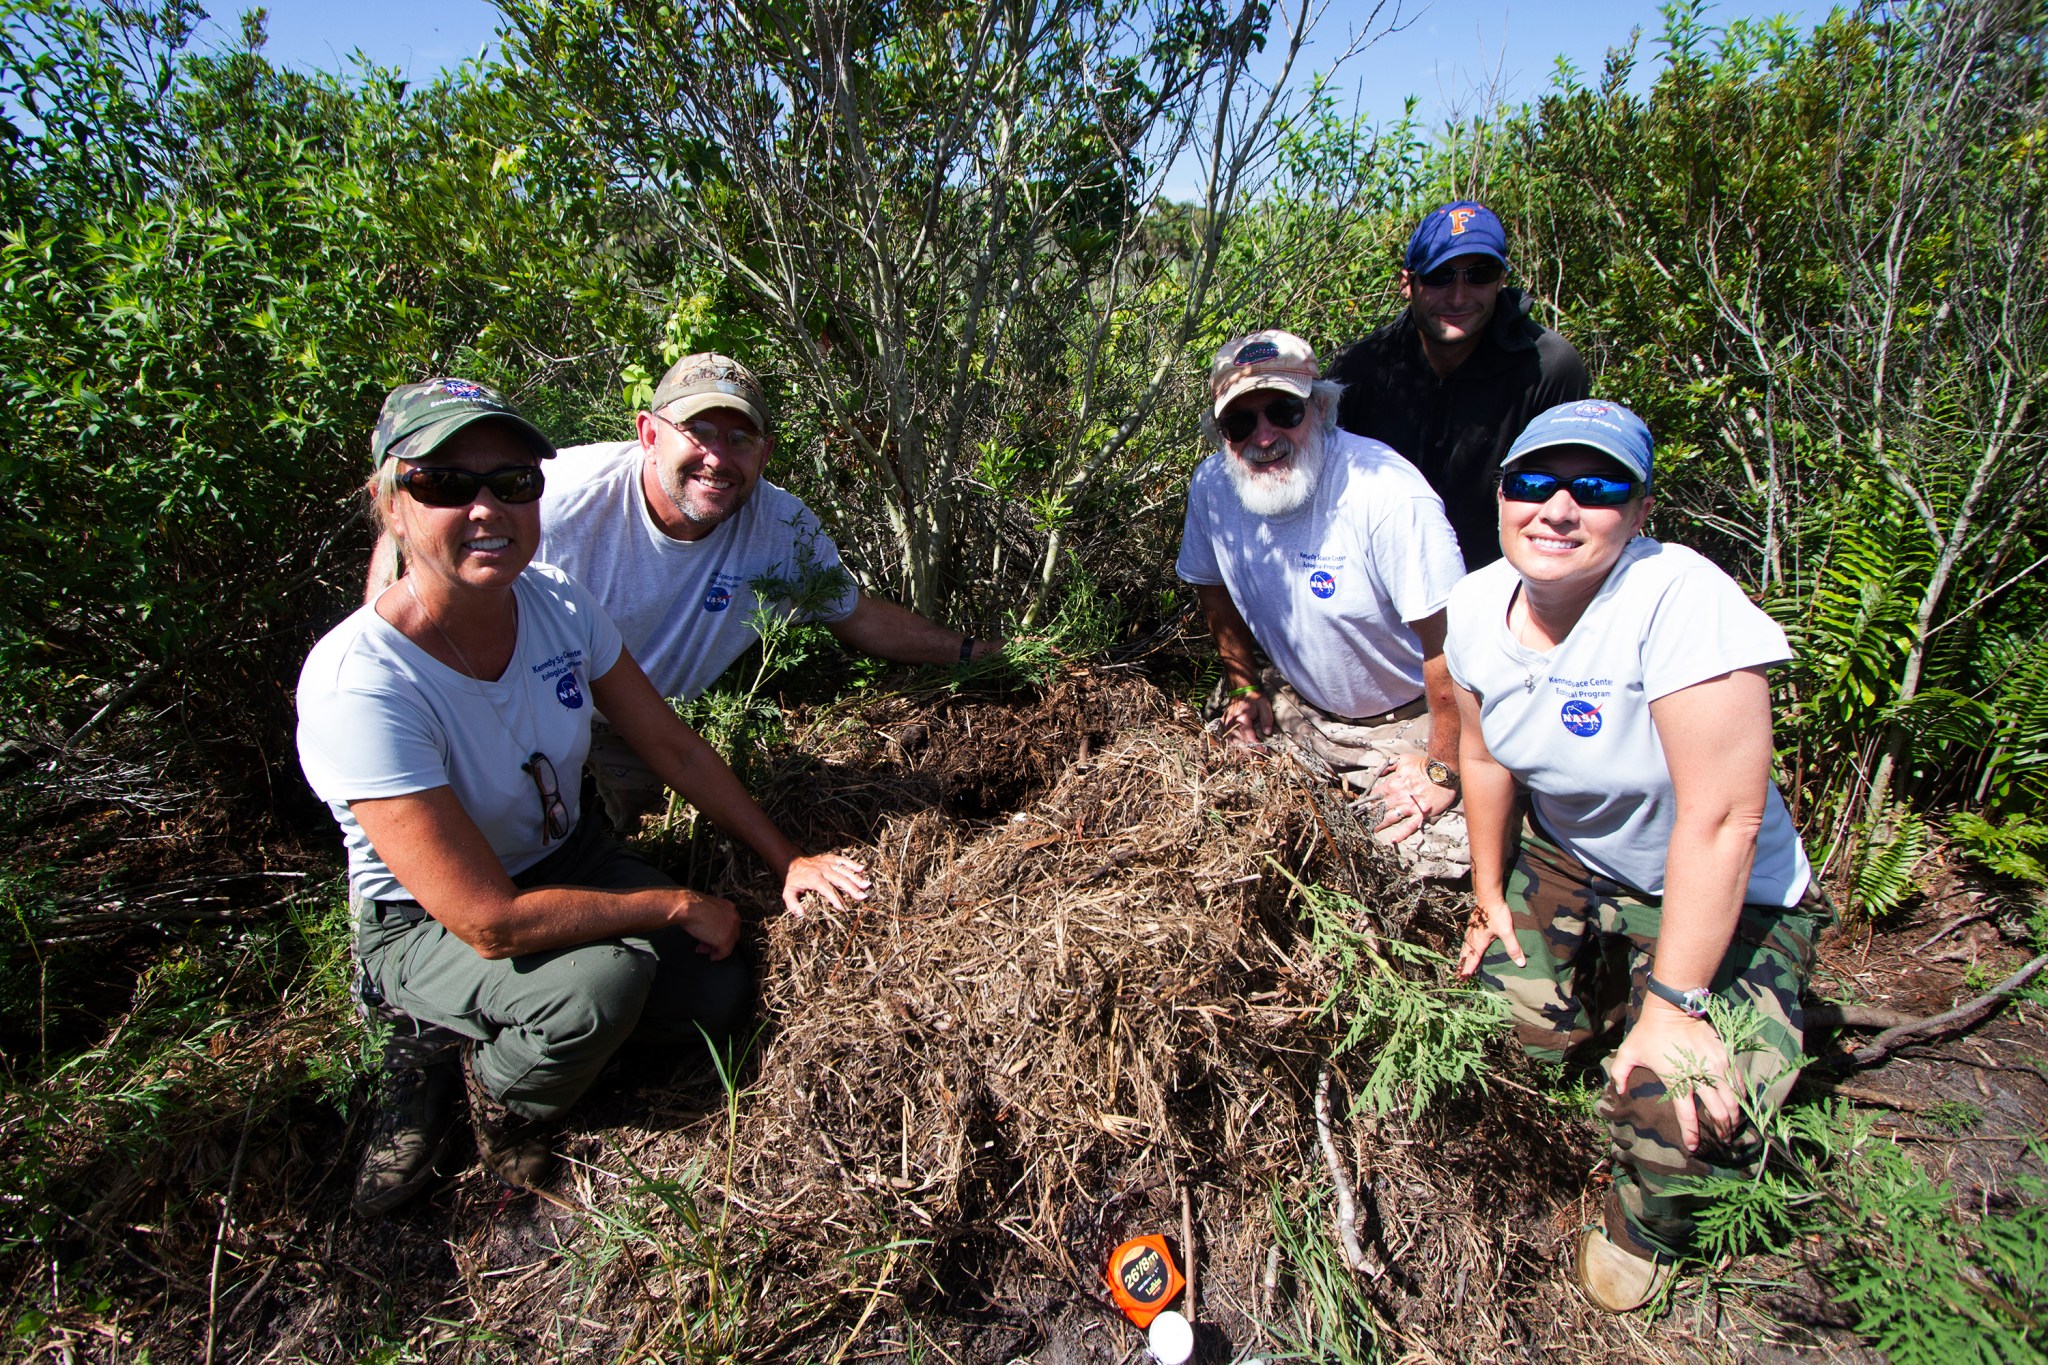 Members of Kennedy Space Center's Ecological Program gather around an alligator nest